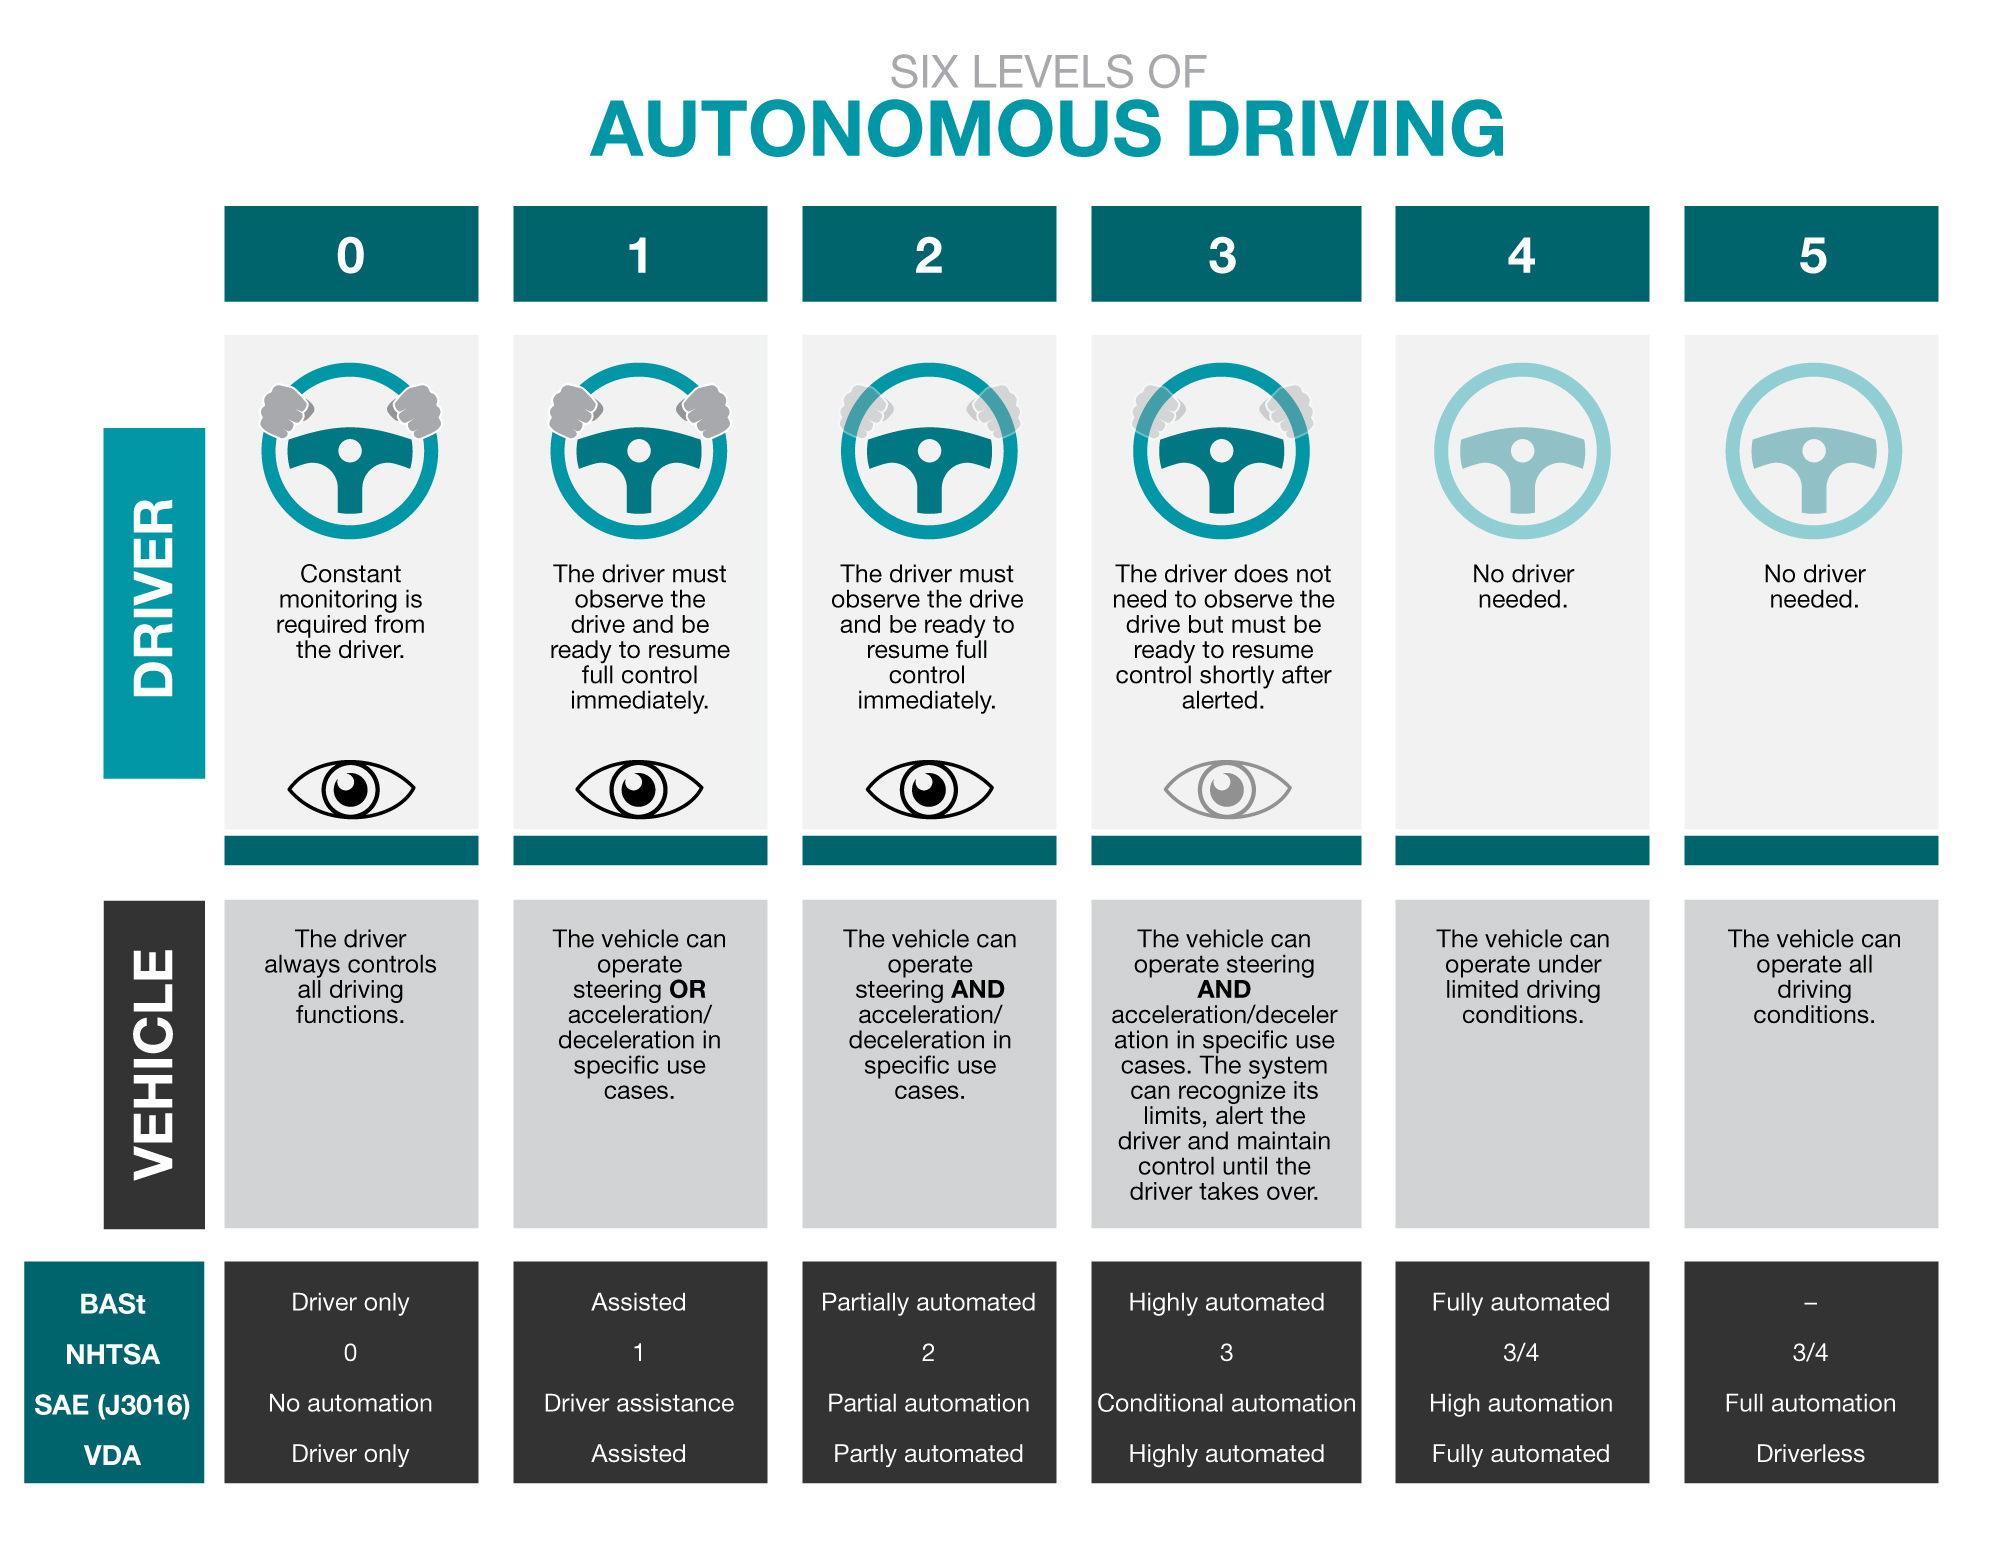 How ADAS Is Paving the Way for Autonomous Driving 5G Technology World